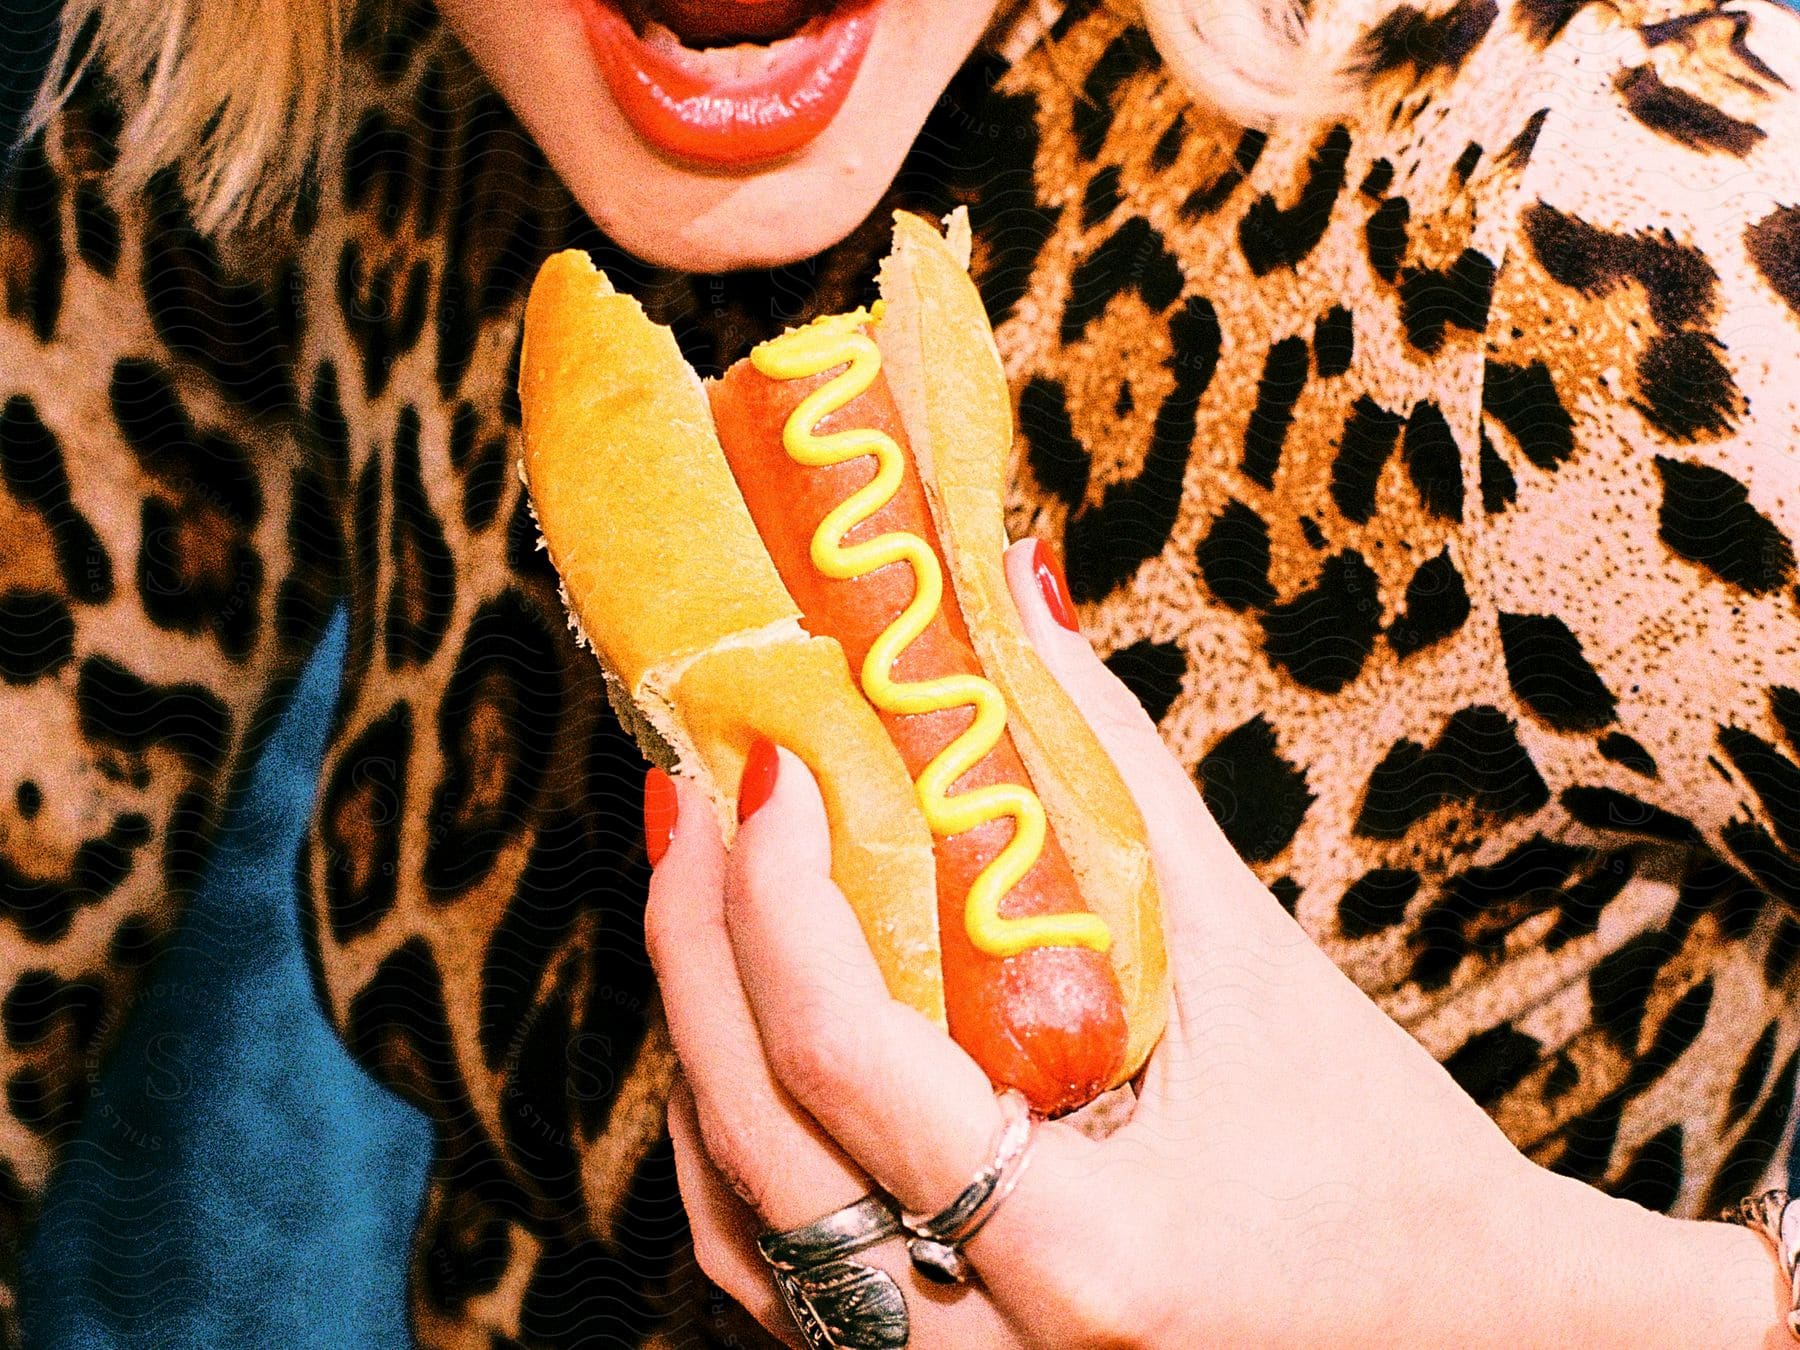 Woman brings an already-bitten hotdog with mustard on it closer to her open mouth with her left hand.